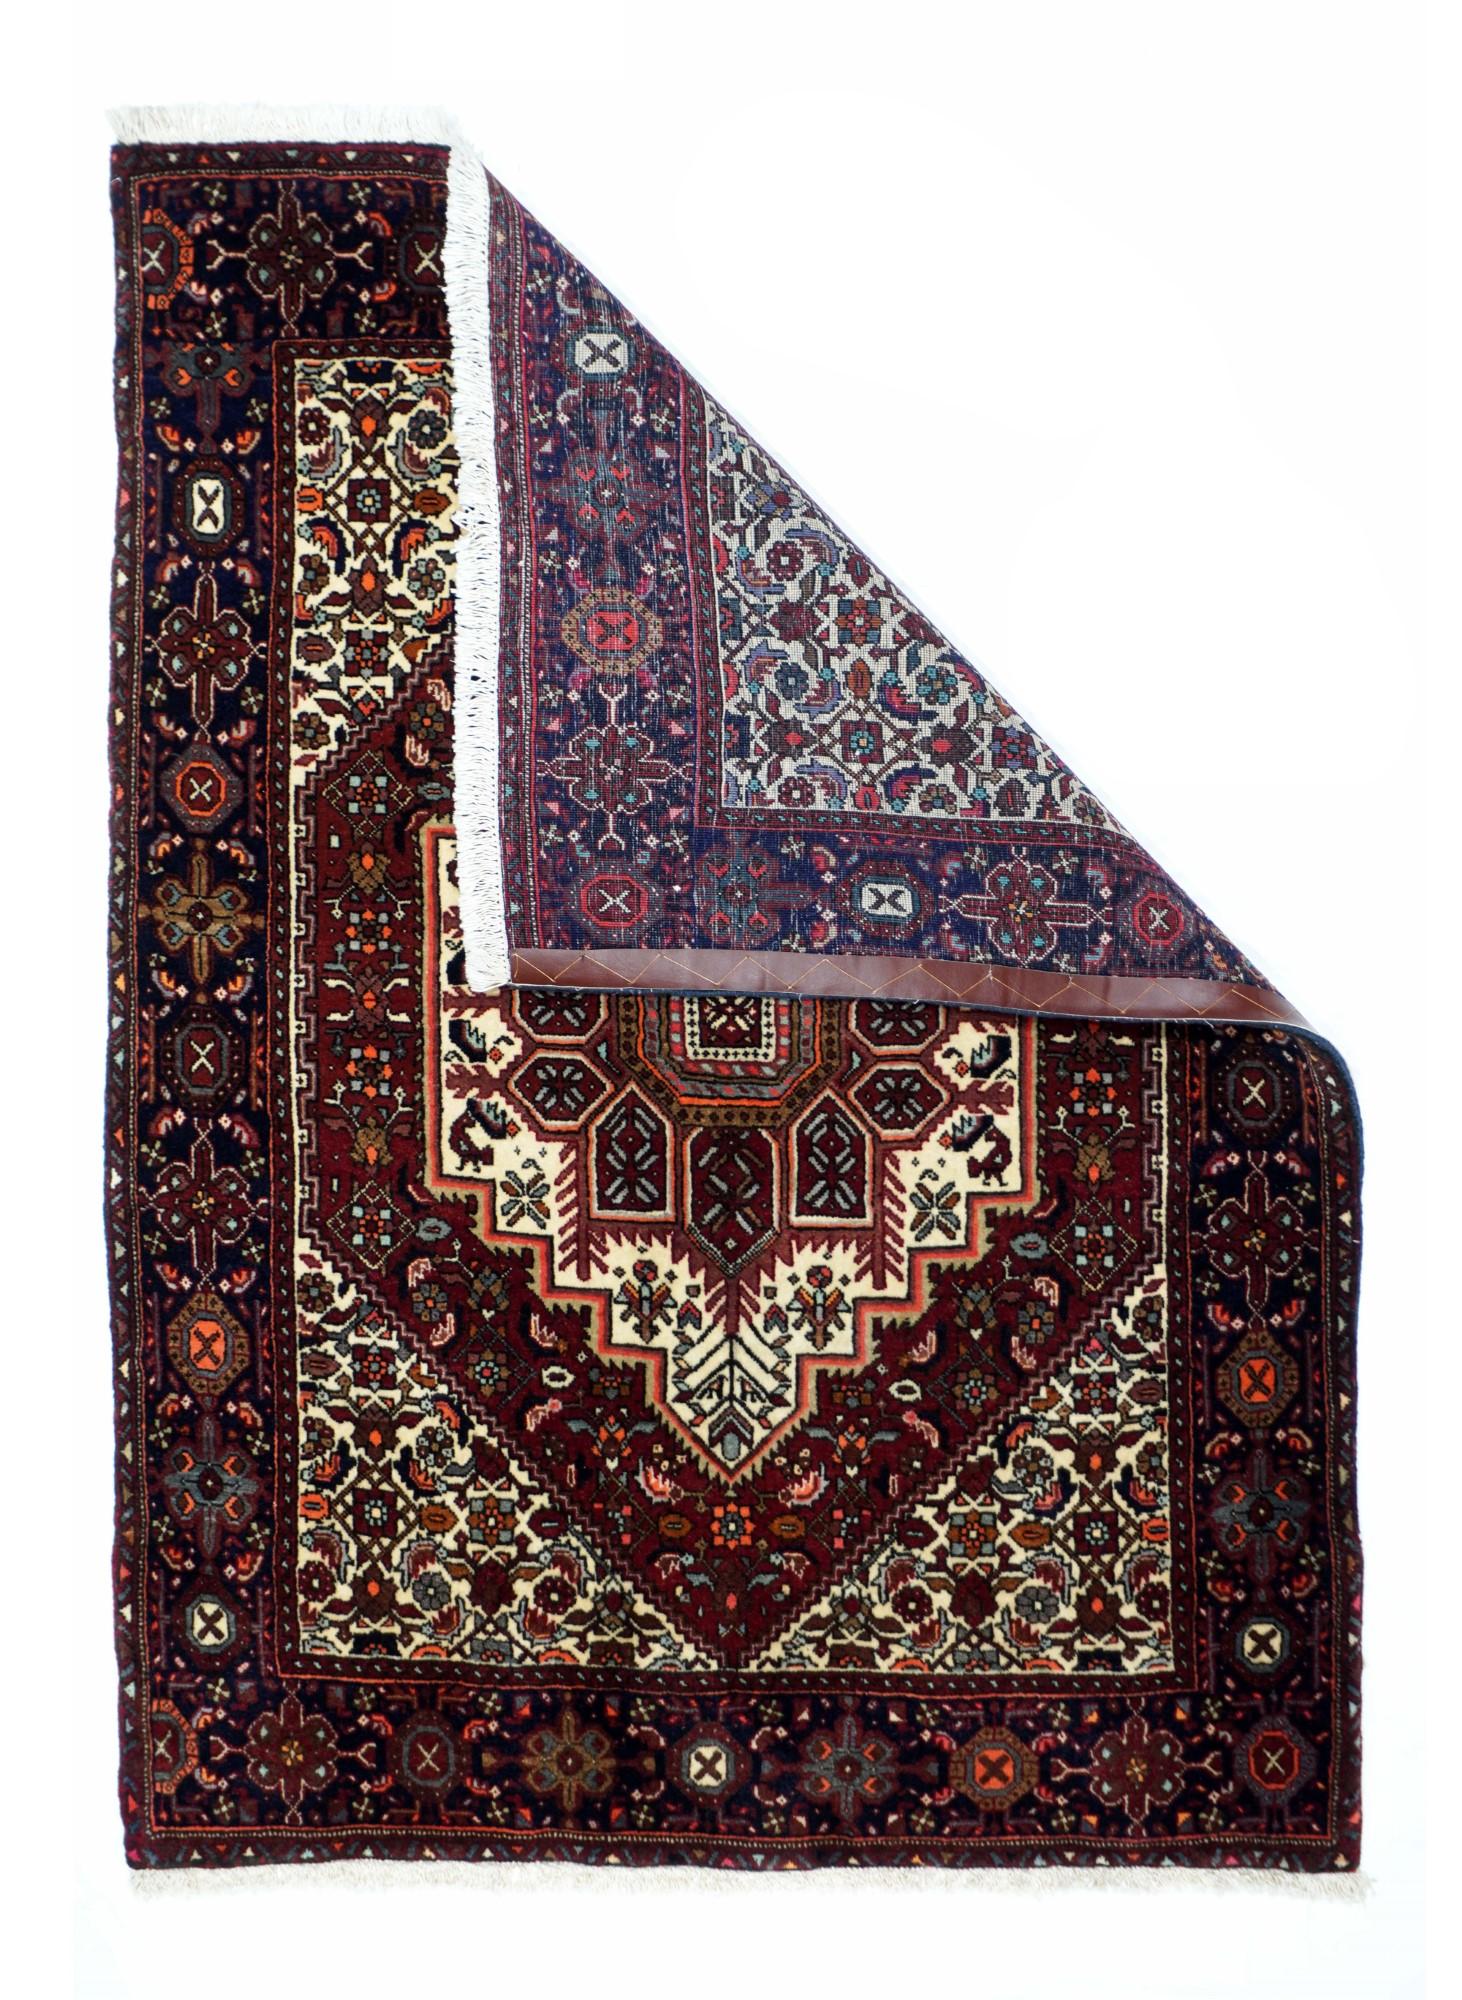 Bidjar rug 3'5'' x 4'8''. This west Persian village scatter with the characteristic navy octofoil and cartouche border, is in the typical Heriz style with a dodecanal (12 lobe) palmette sub-medallion, set on a conforming stepped ecru medallion with